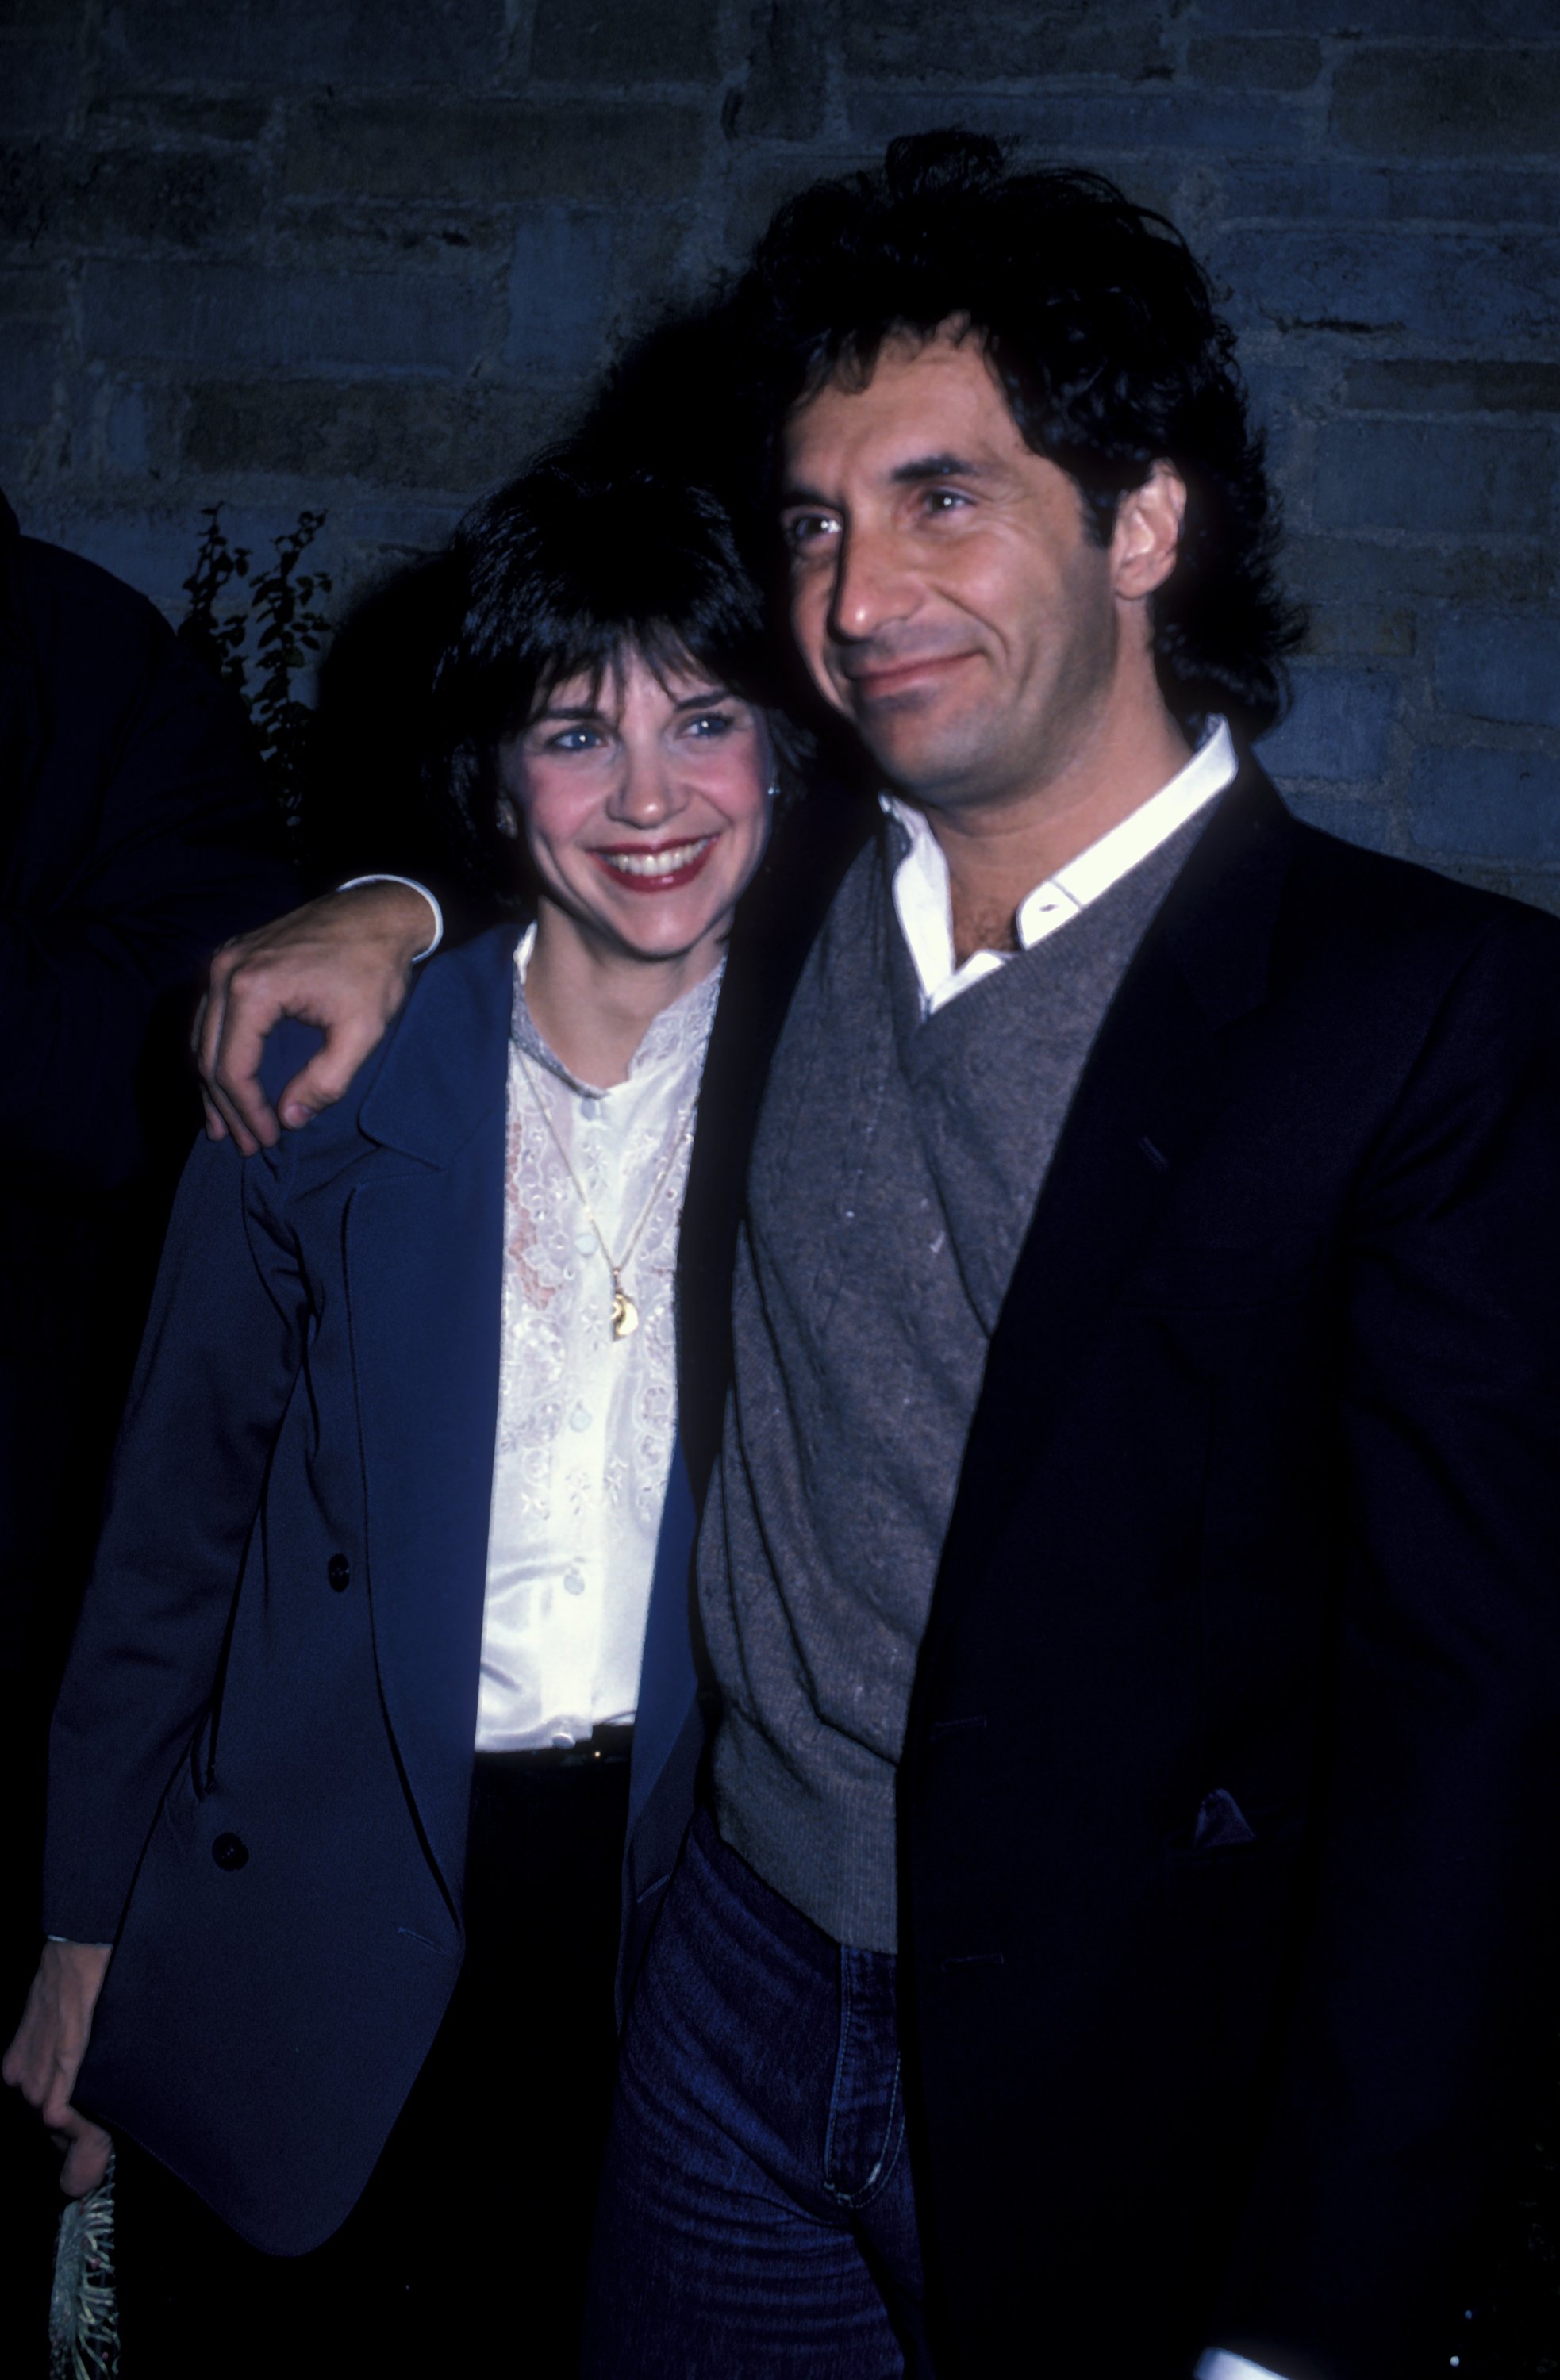 Cindy Williams and Bill Hudson attend the performance of "The Groundlings" on March 19, 1984 at the Westwood Playhouse in Westwood, California | Source: Getty Images